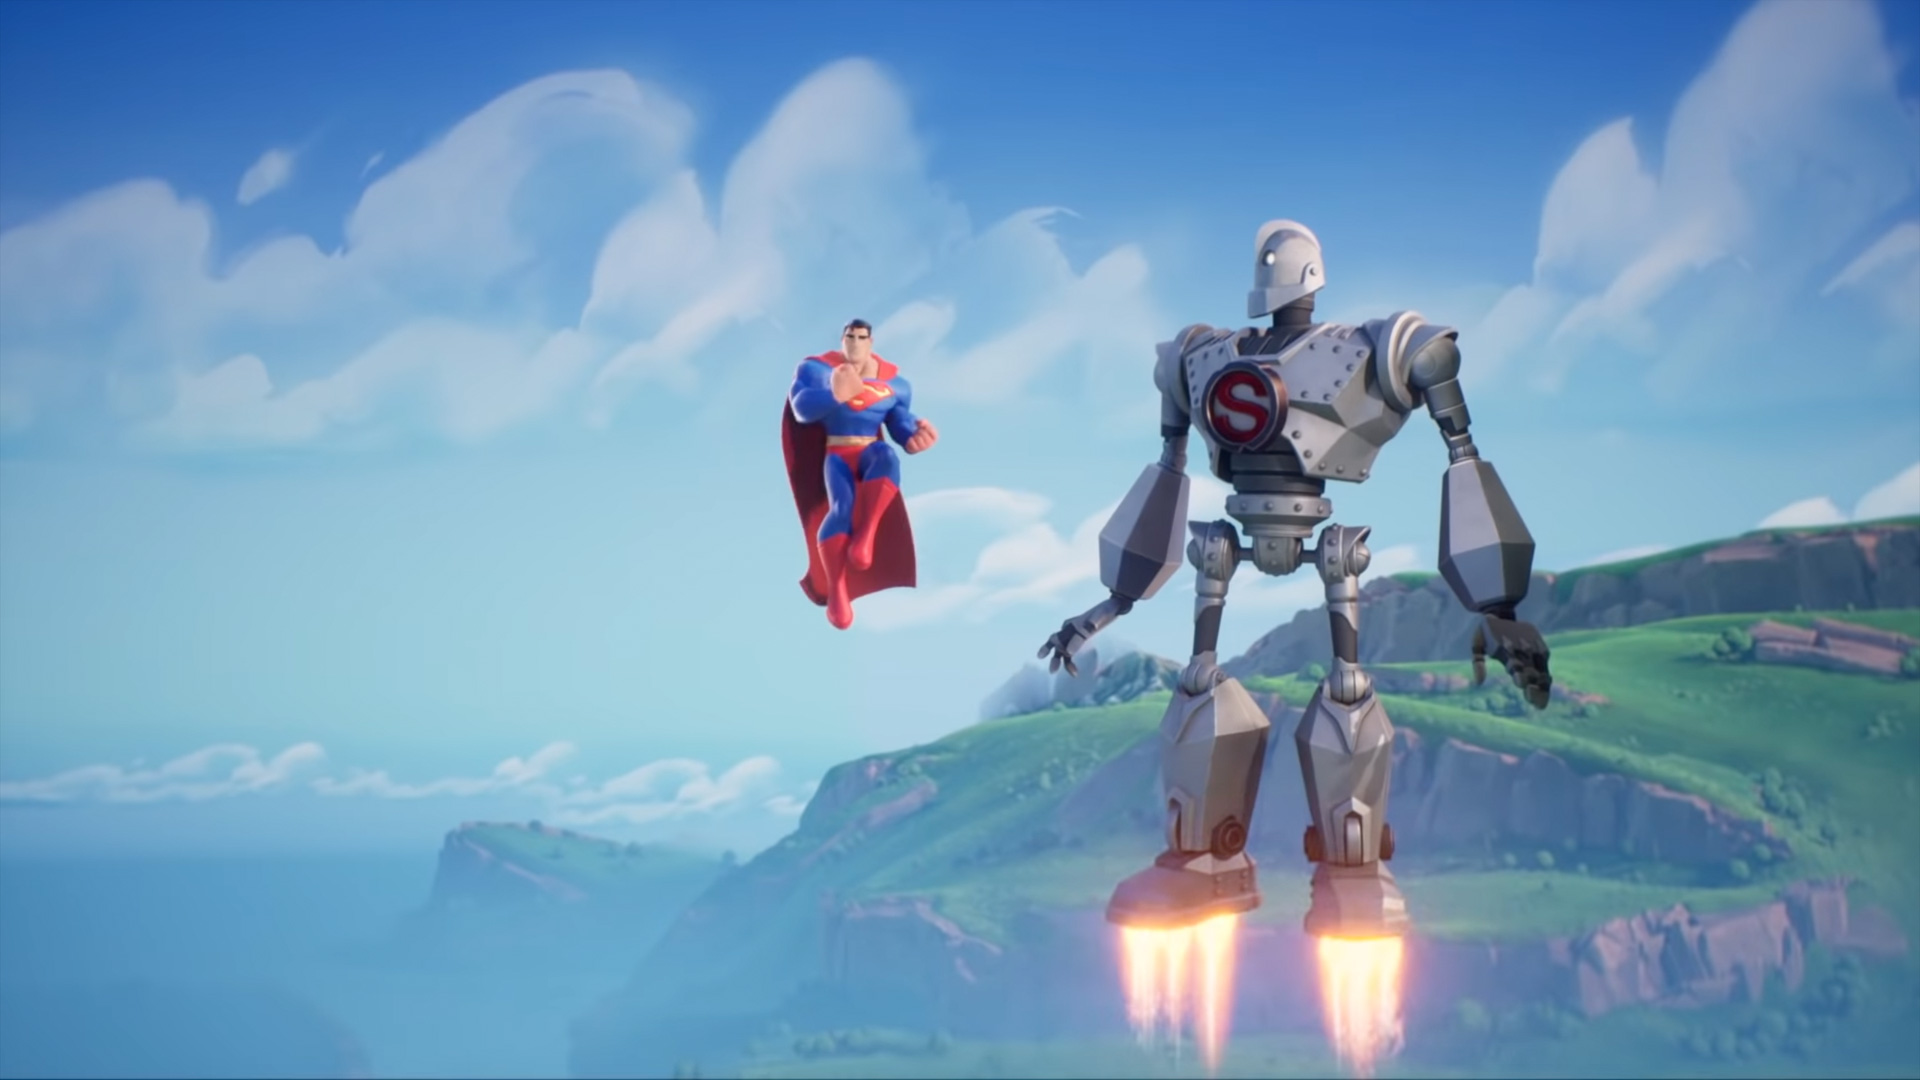 MultiVersus is here with Batman, Superman, and.Iron Giant?